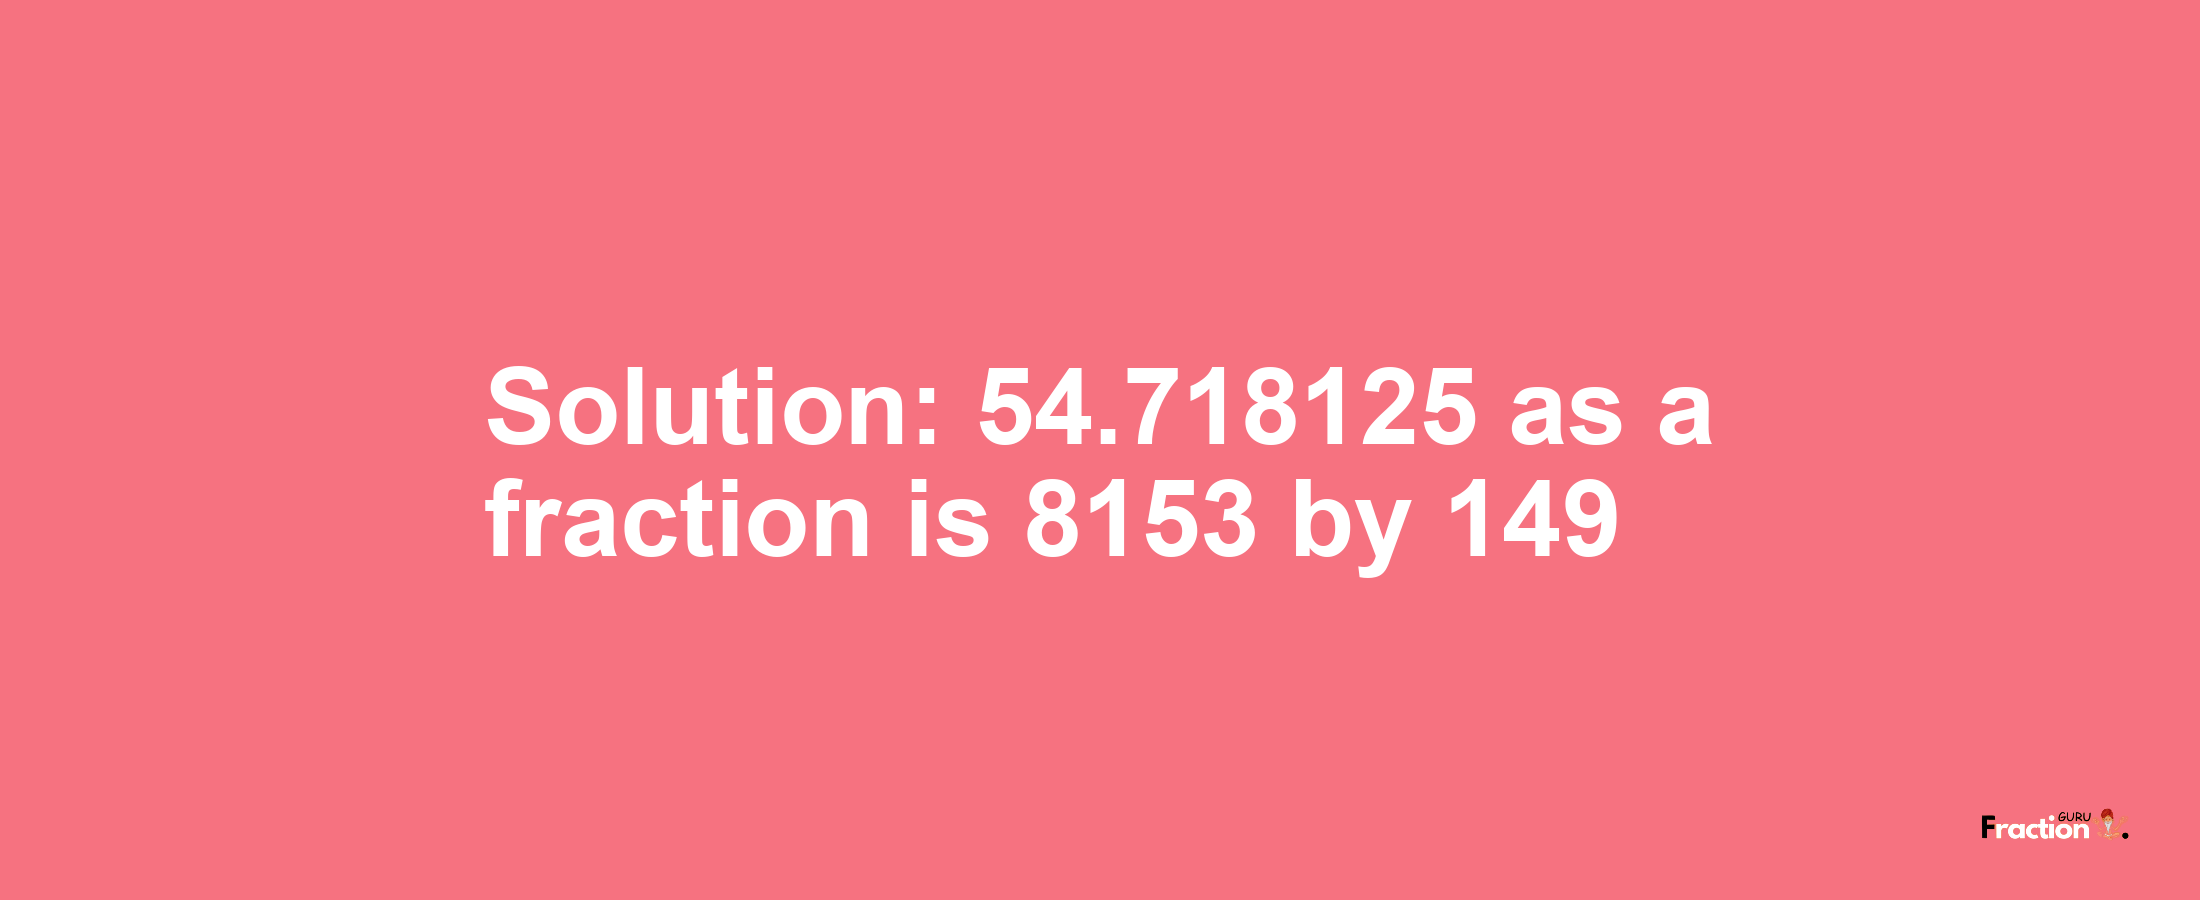 Solution:54.718125 as a fraction is 8153/149